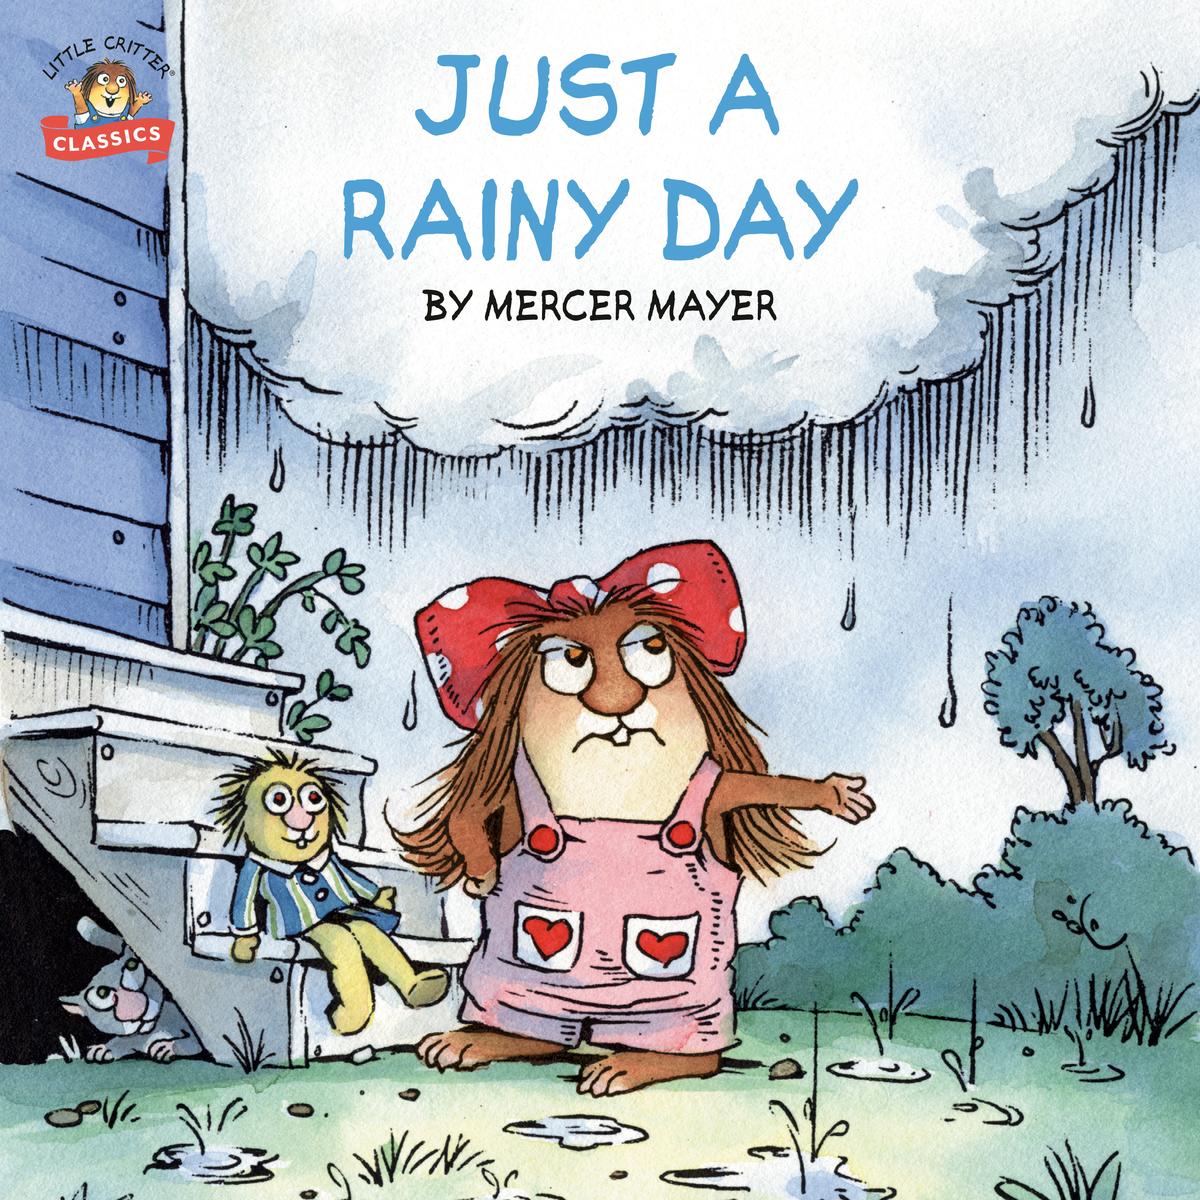 Just a Rainy Day (Little Critter) - 